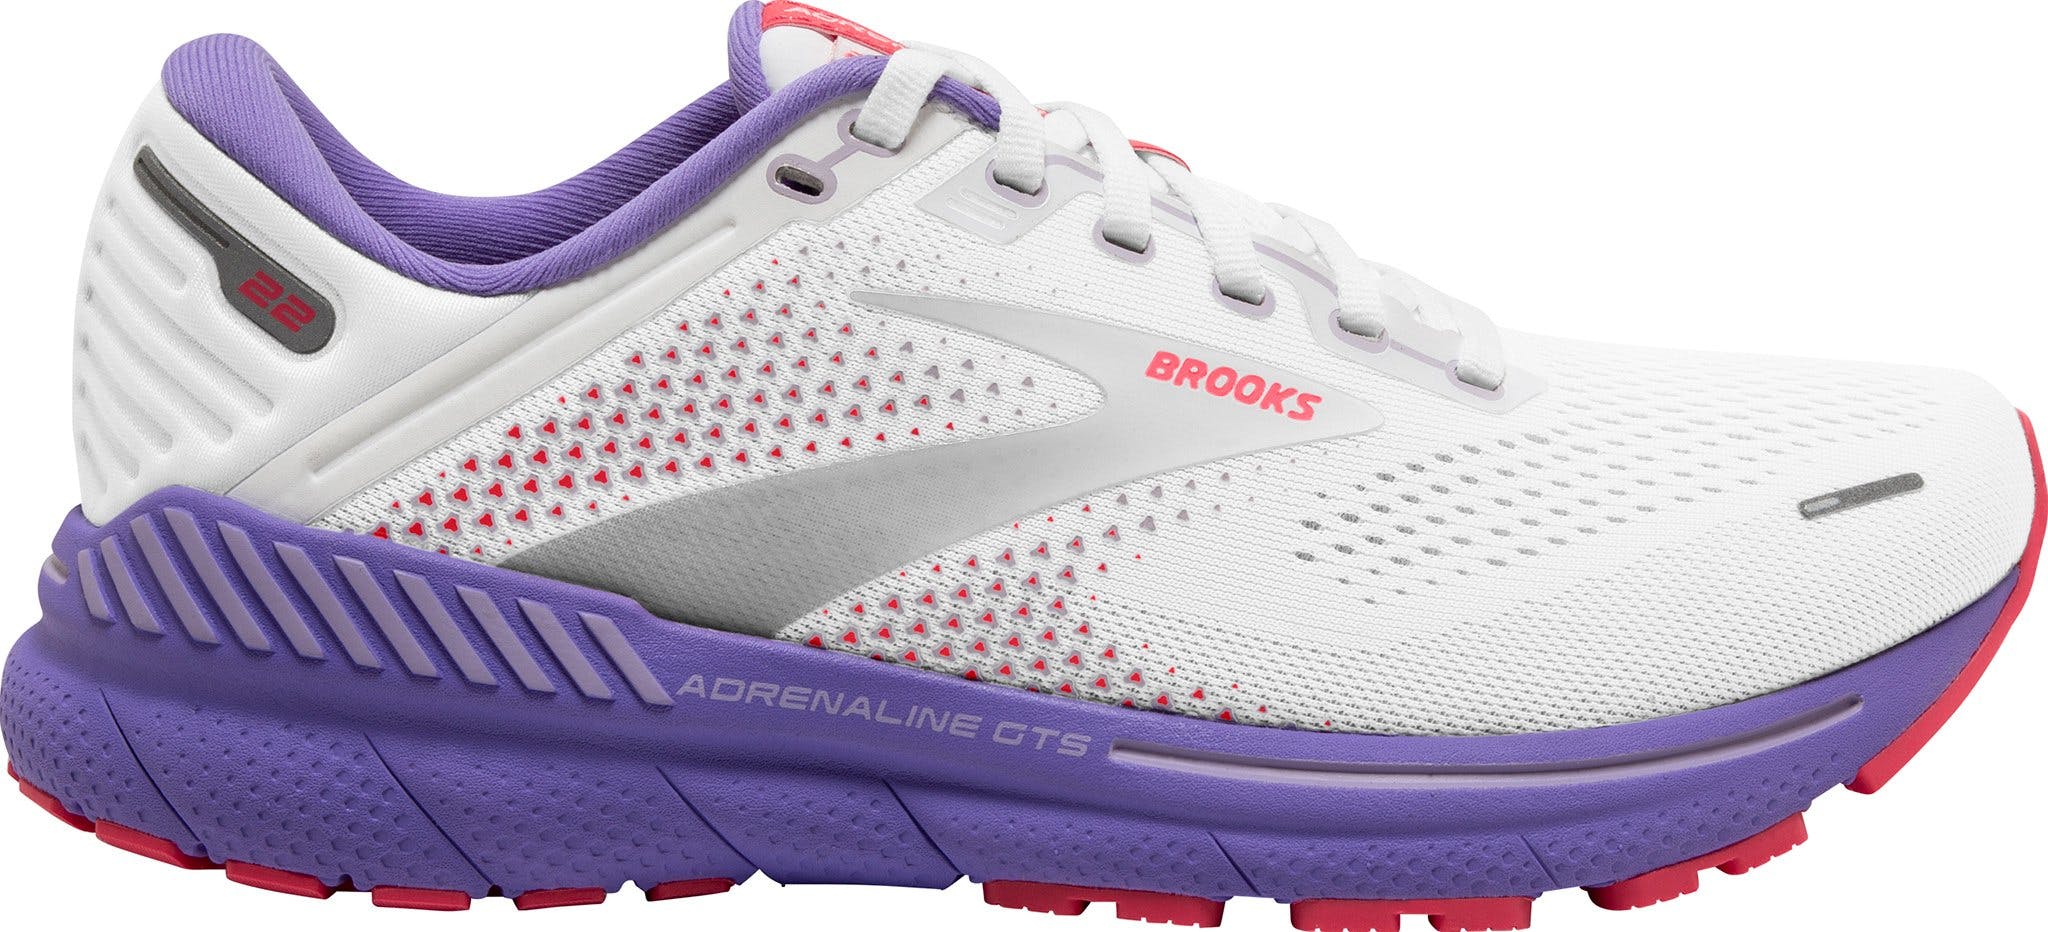 Product image for Adrenaline GTS 22 Running Shoes - Women's